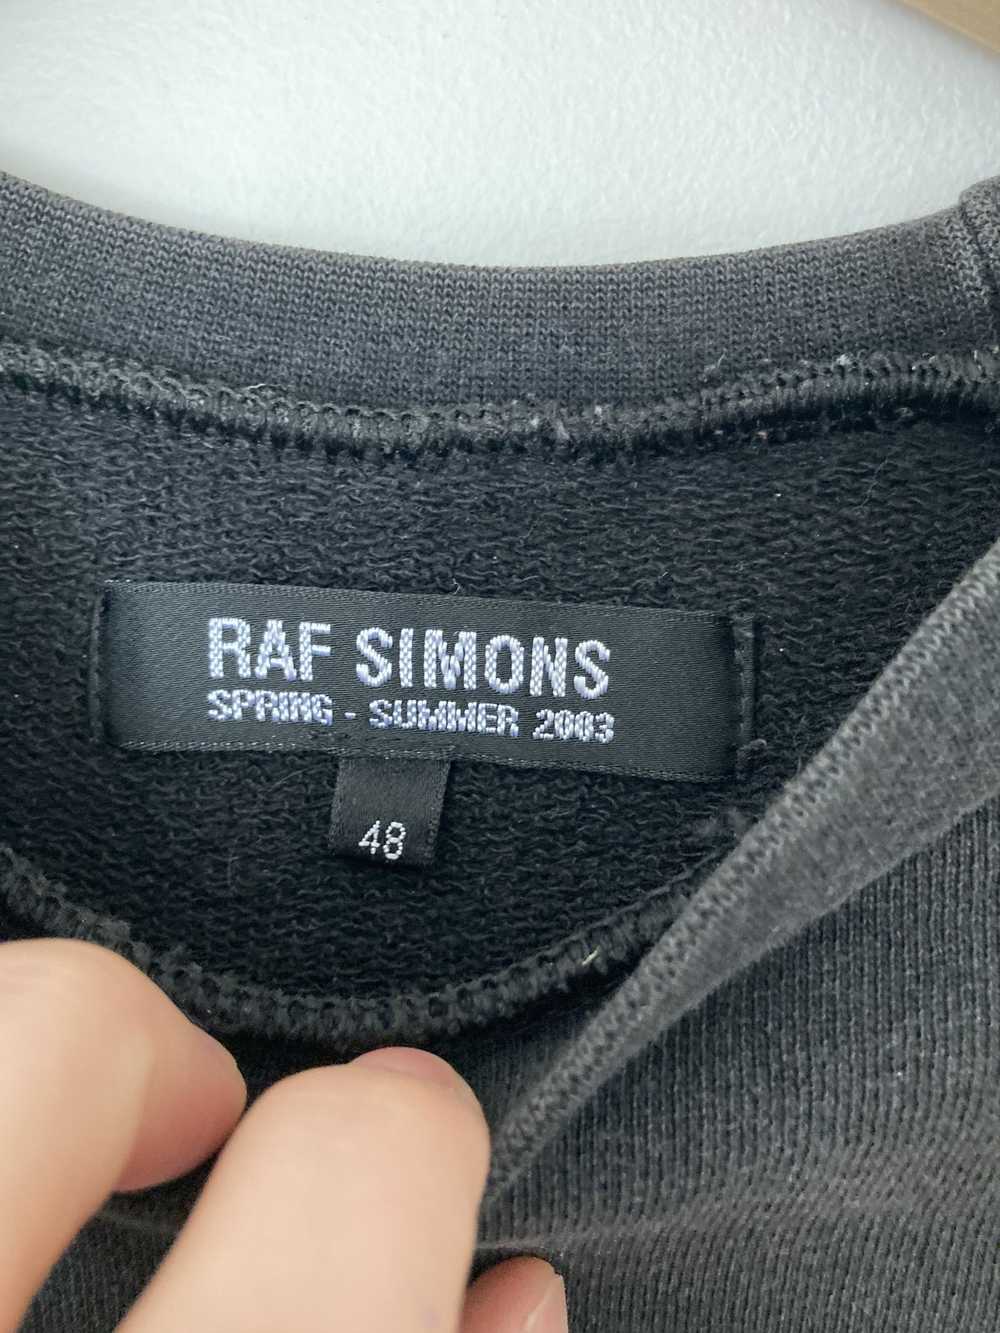 Raf Simons Raf SS03 Consumed "Commodity" sweater - image 7